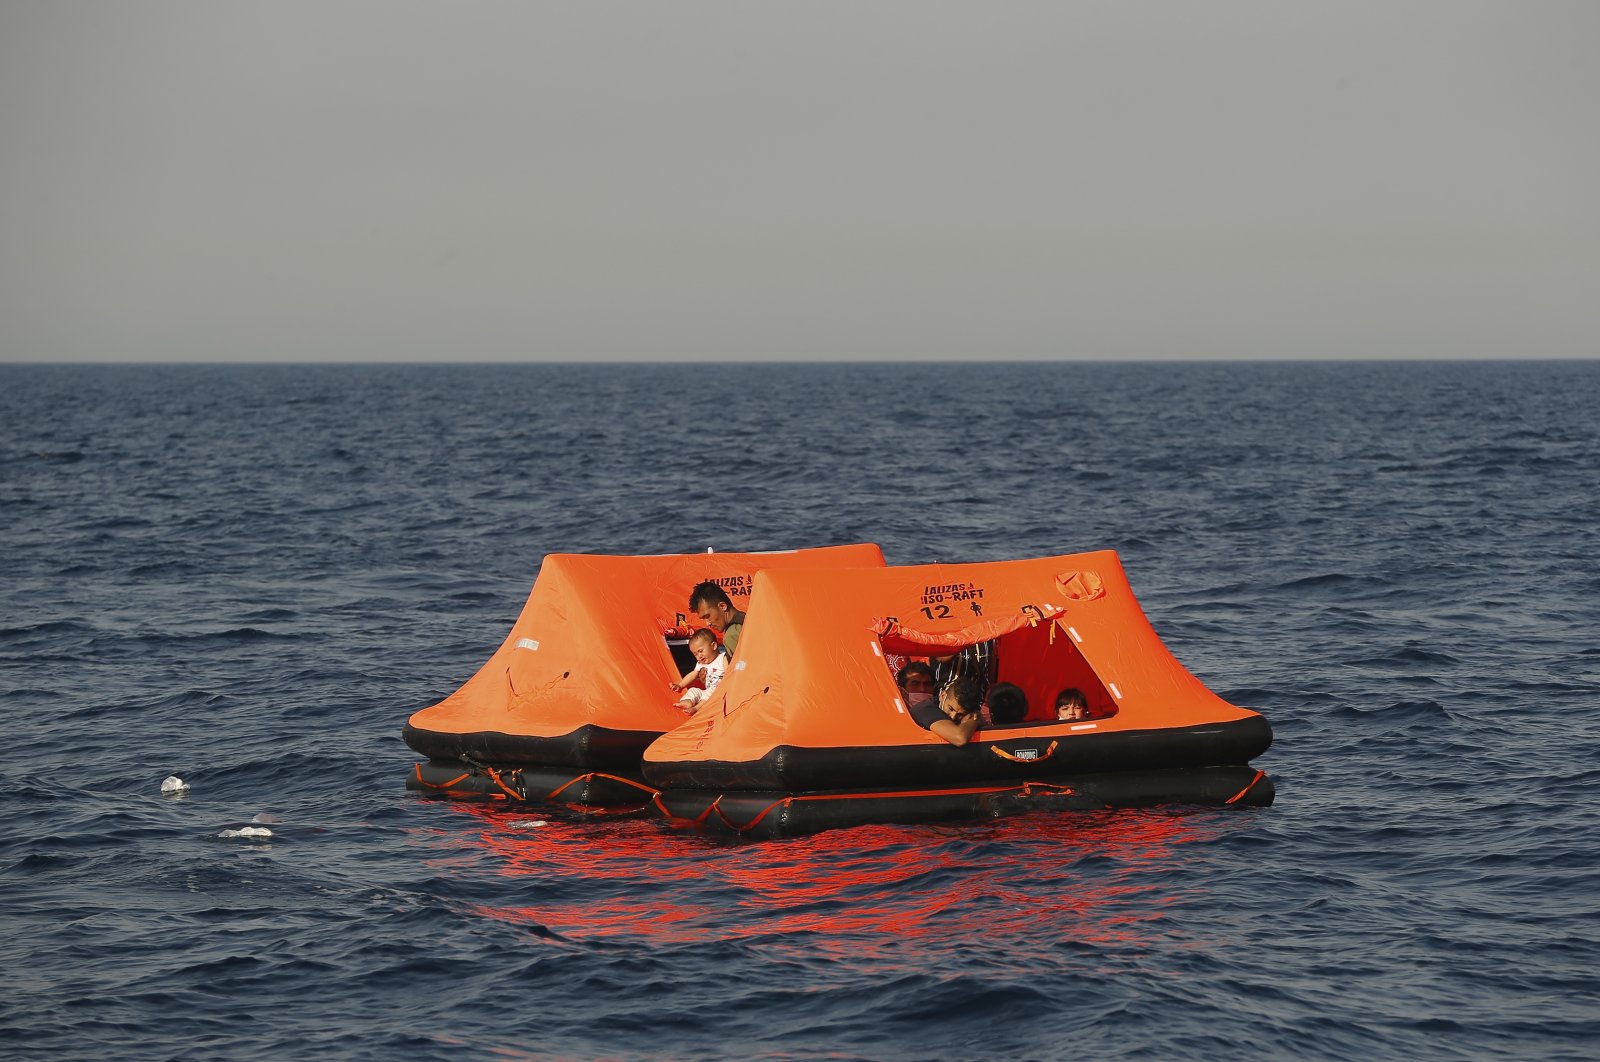 Afghan migrants pushed back by the Greek coast guard wait inside a life raft during a rescue operation by the Turkish coast guard, in the Aegean Sea, between Turkey and Greece, Sept. 12, 2020. (AP File Photo)